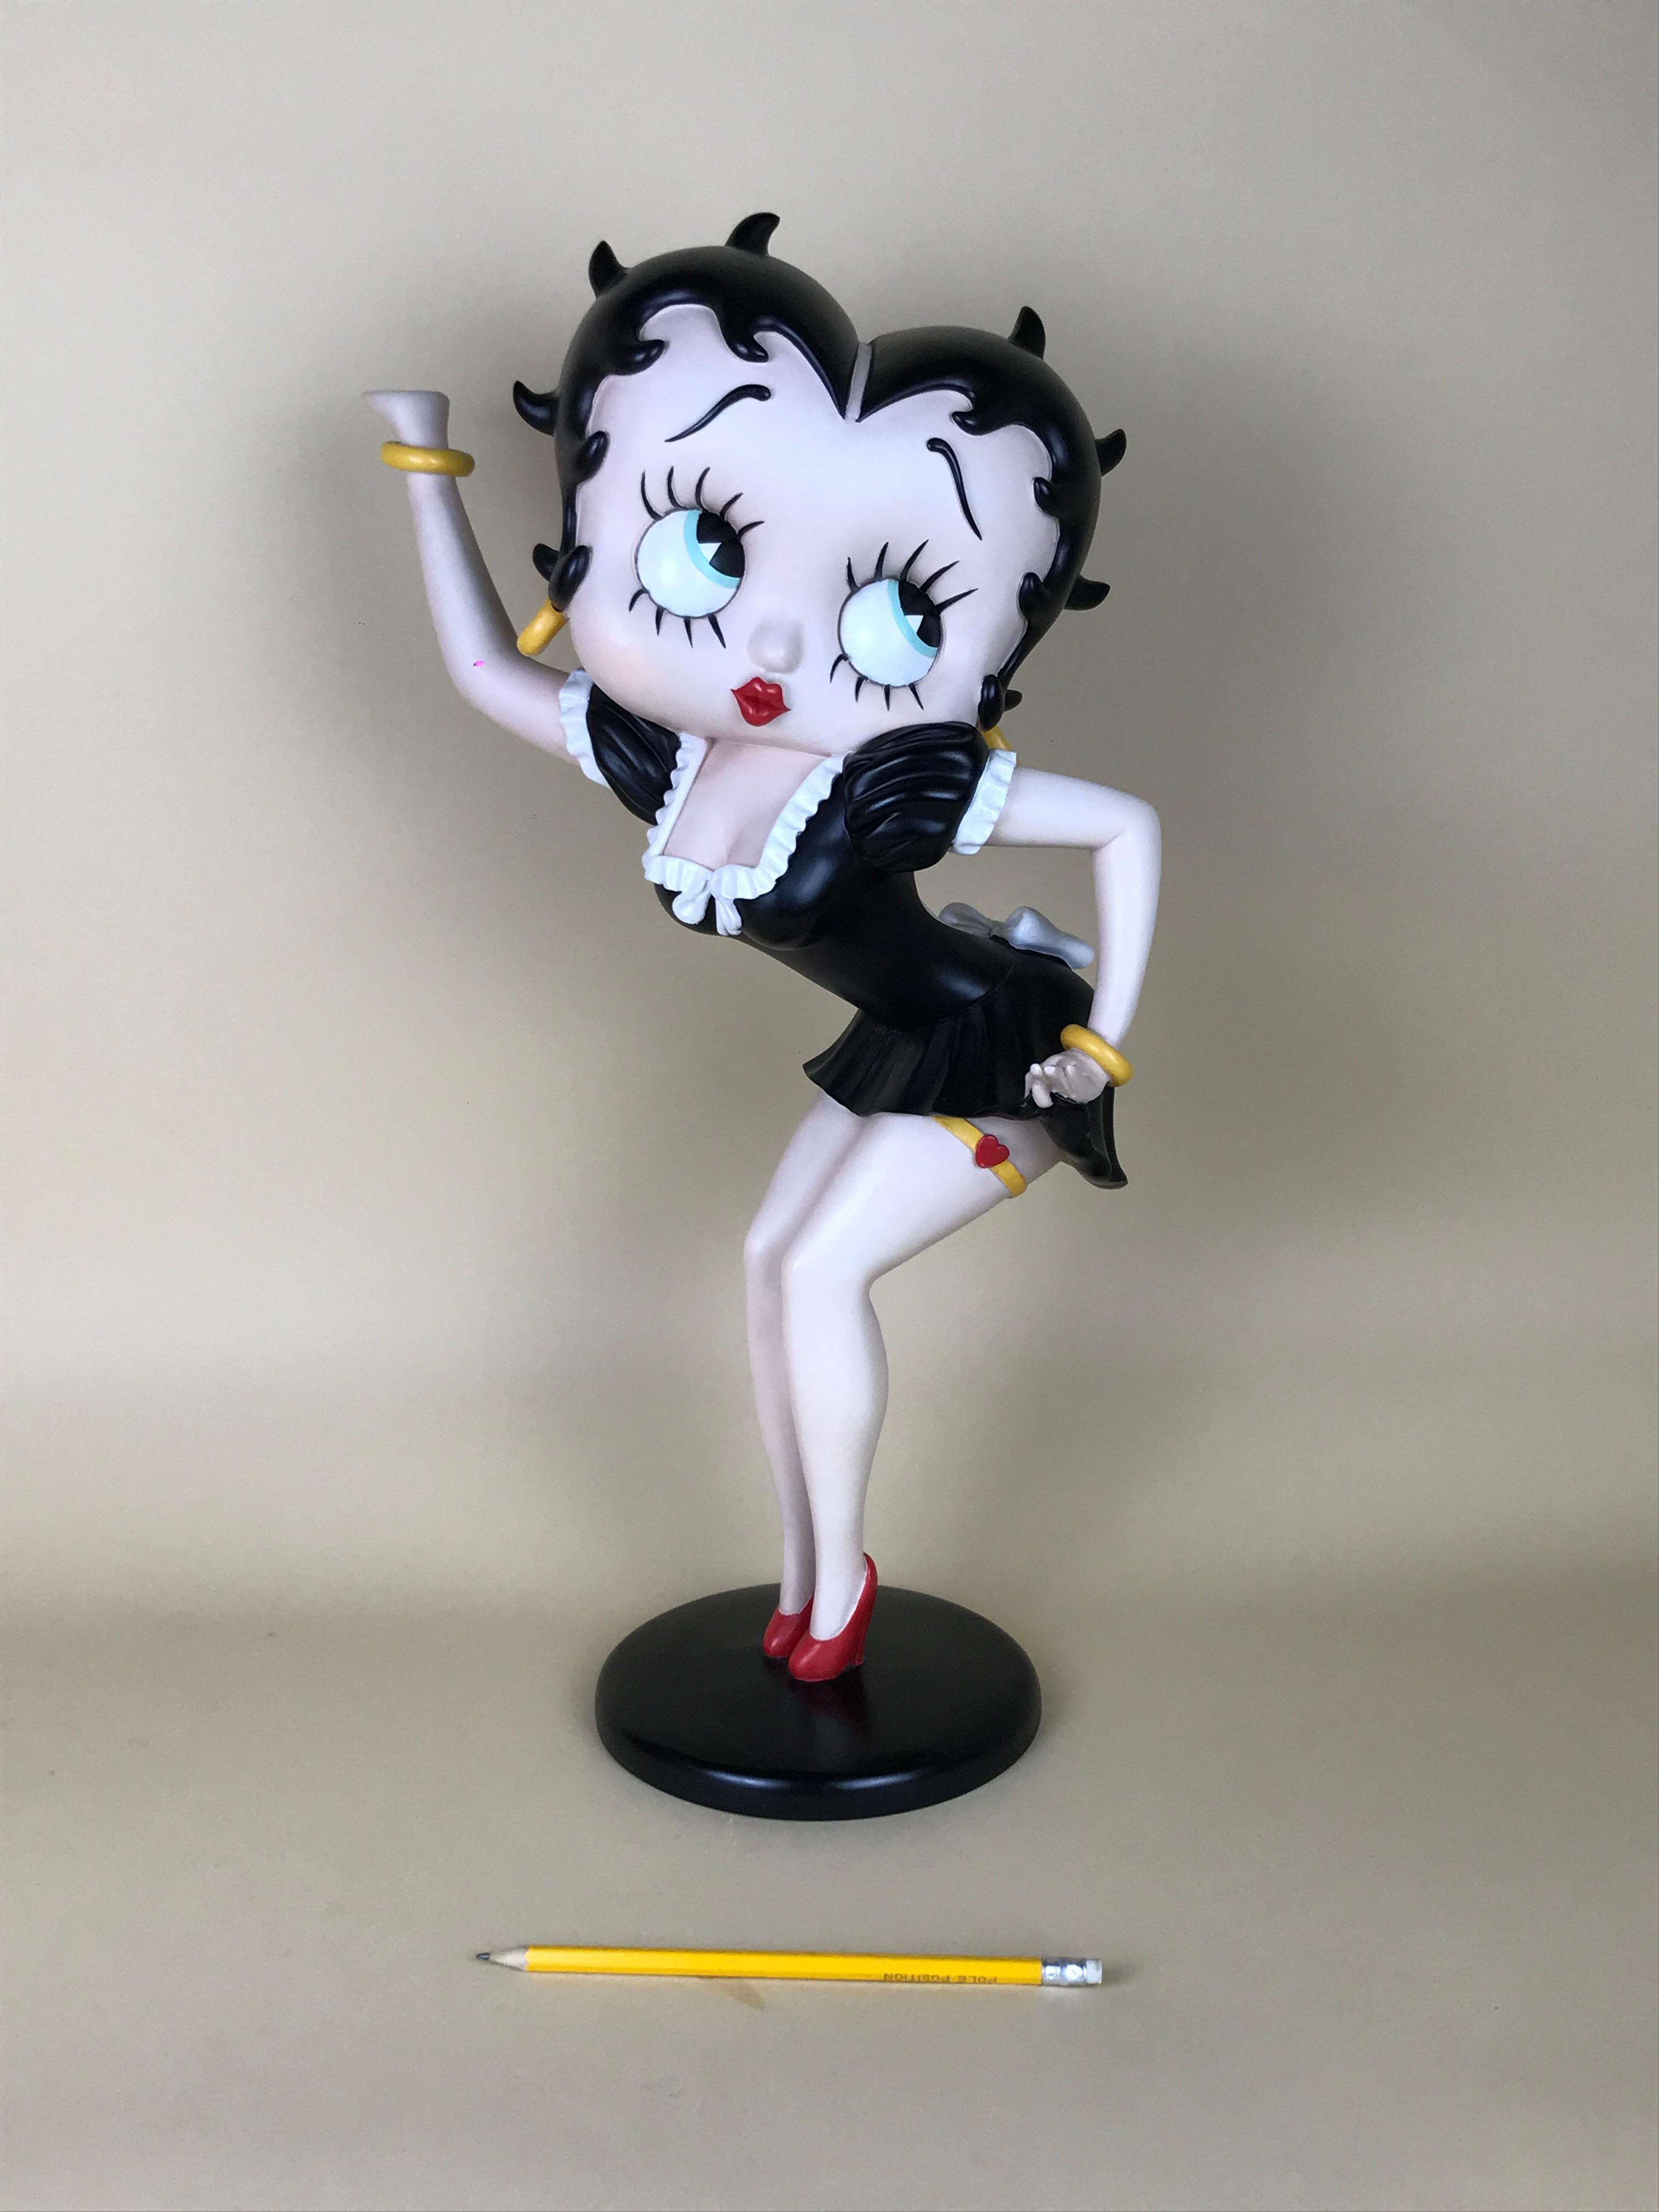 Betty Boop waitress resine statue by Fleischer Studios realized for King Features Syndicate, Inc in the early 2000s.

The statue doesn't have the original tray.

Collector's note:

King Features Syndicate, Inc. is a print syndication company